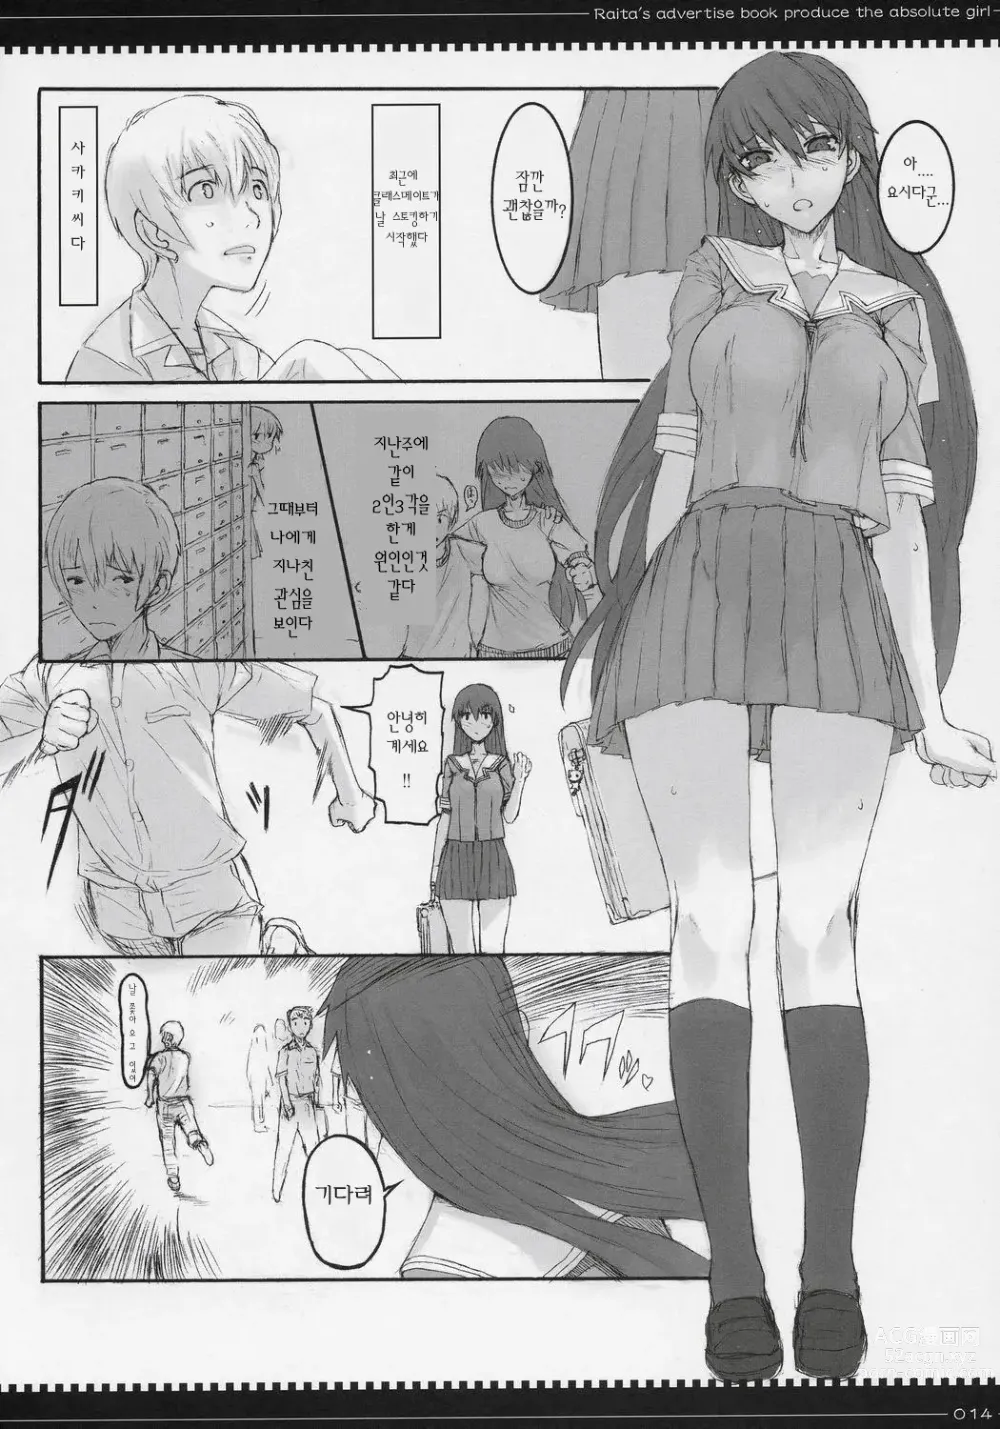 Page 1 of doujinshi Raitas advertise book produce the absolute girl